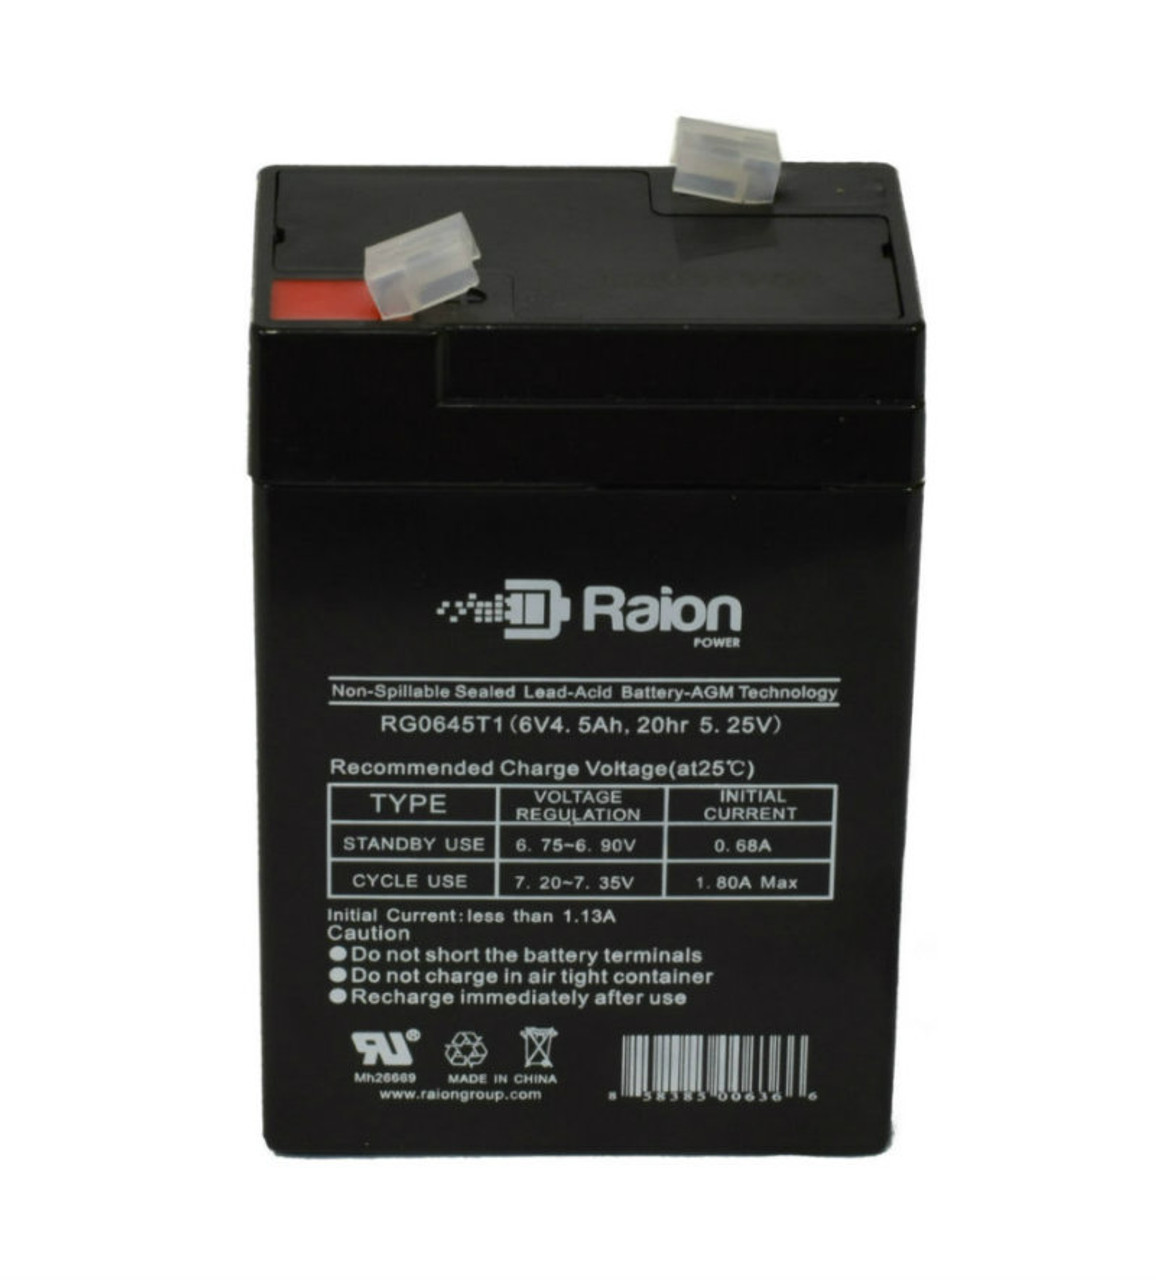 Raion Power RG0645T1 Replacement Battery Cartridge for Mcgaw 522 Intelligent Pump